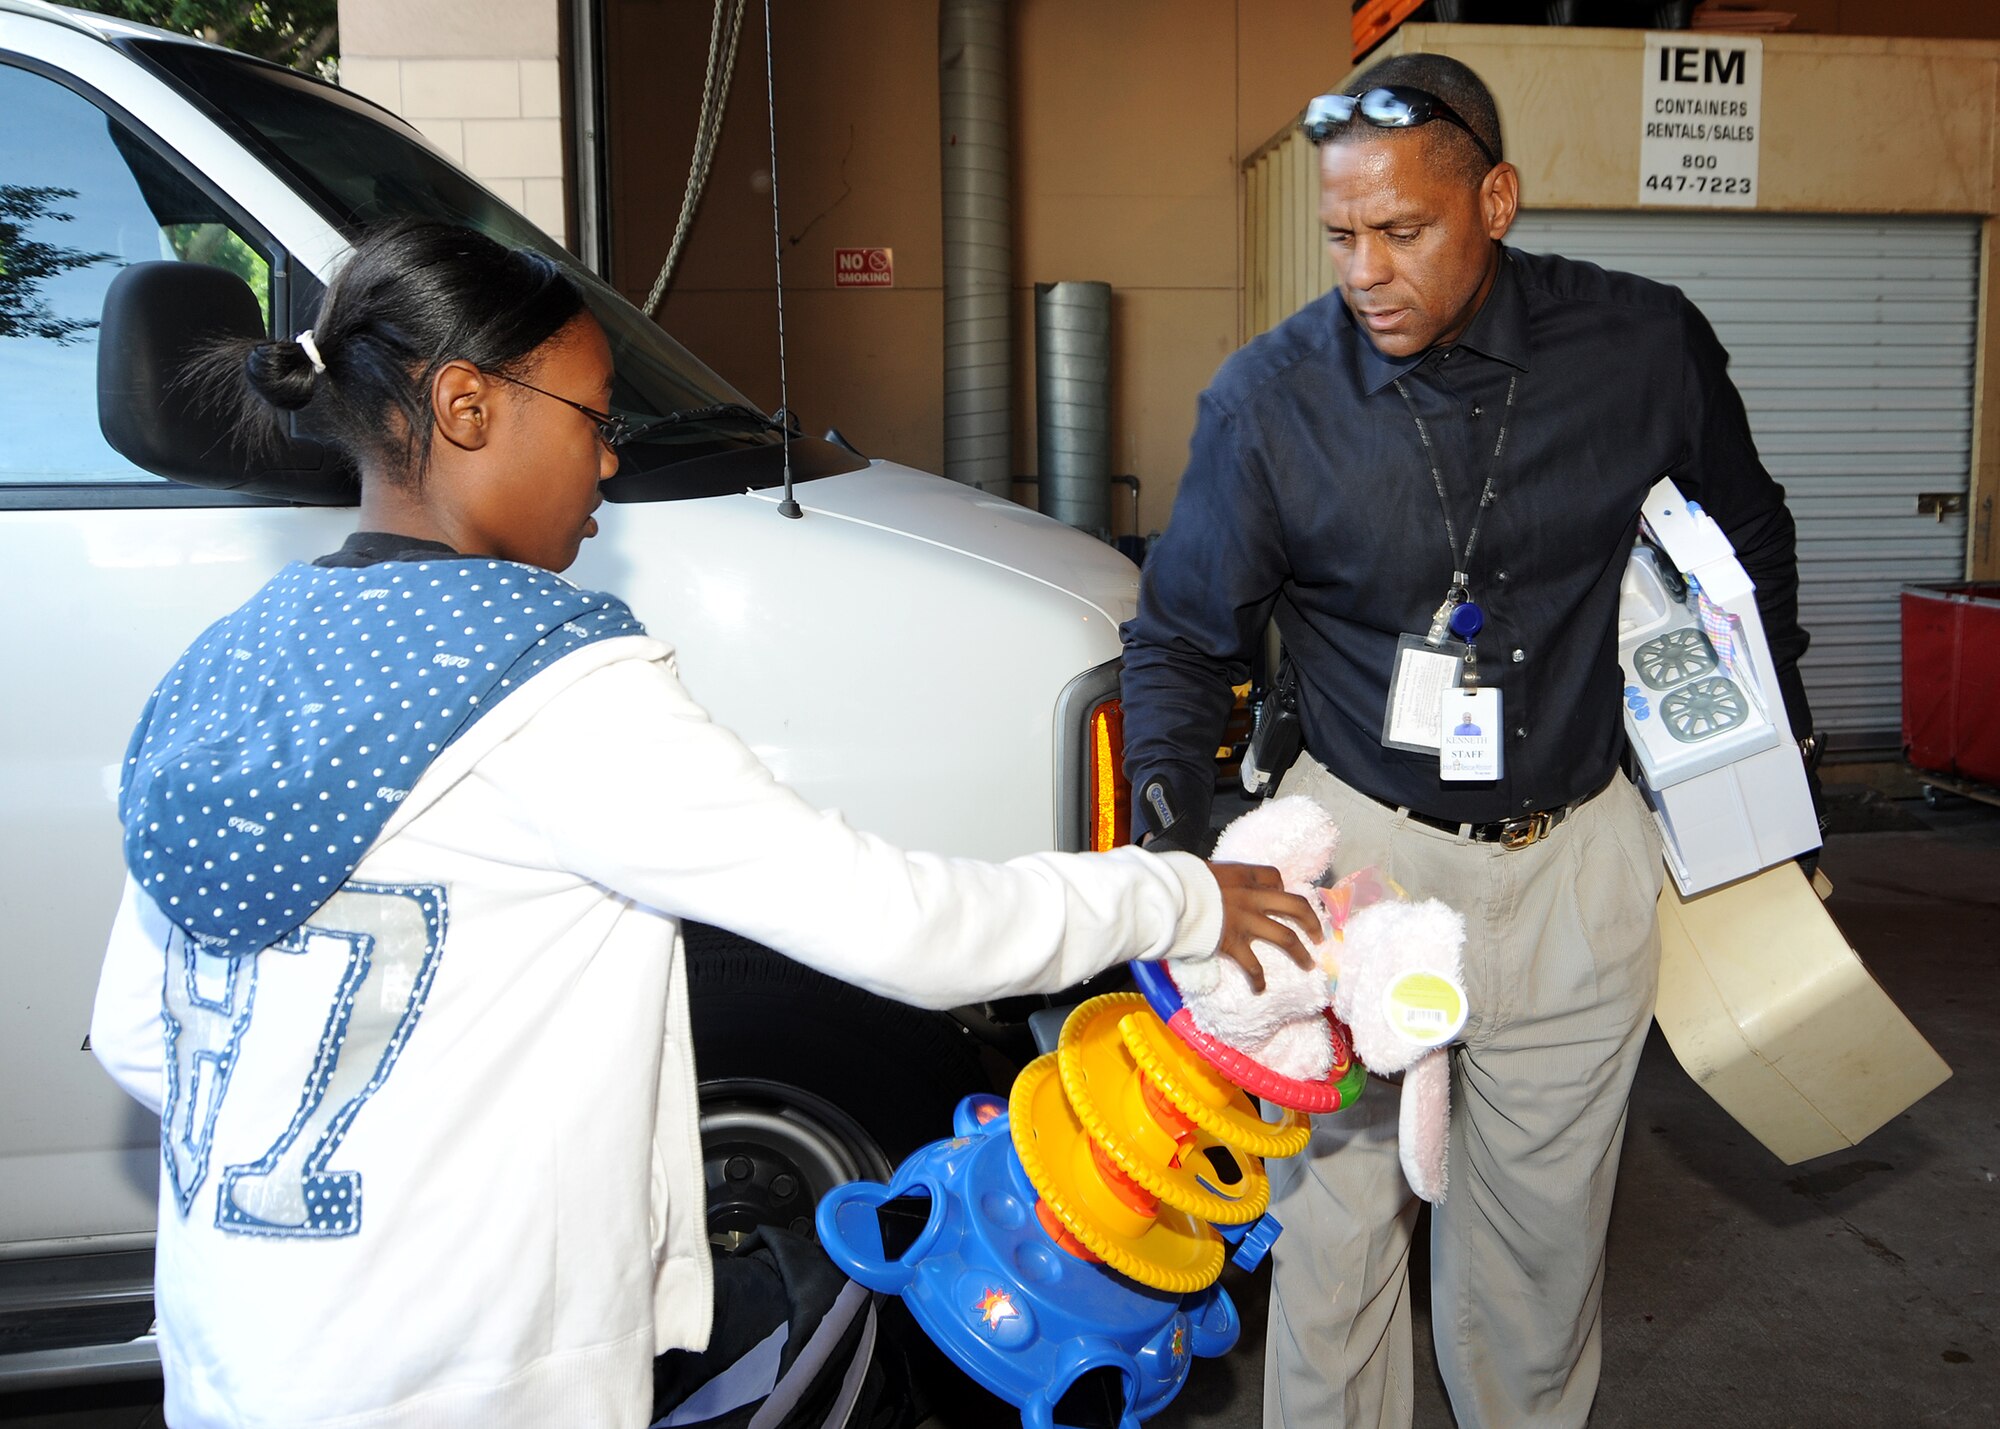 Maria Simmons hands a toy to a staff member at the Union Rescue Mission, Los Angeles, Dec. 18.  Maria and other members from the Los Angeles Air Force Base Youth Programs delivered a van full of toys, clothing and other items collected through donations from the base’s Airman & Family Readiness Center, the Airmen’s Attic and several families on base. The event was part of YP’s Community Out Reach Program, which teaches youths the importance of humanity and caring for others. (Photo by Joe Juarez)